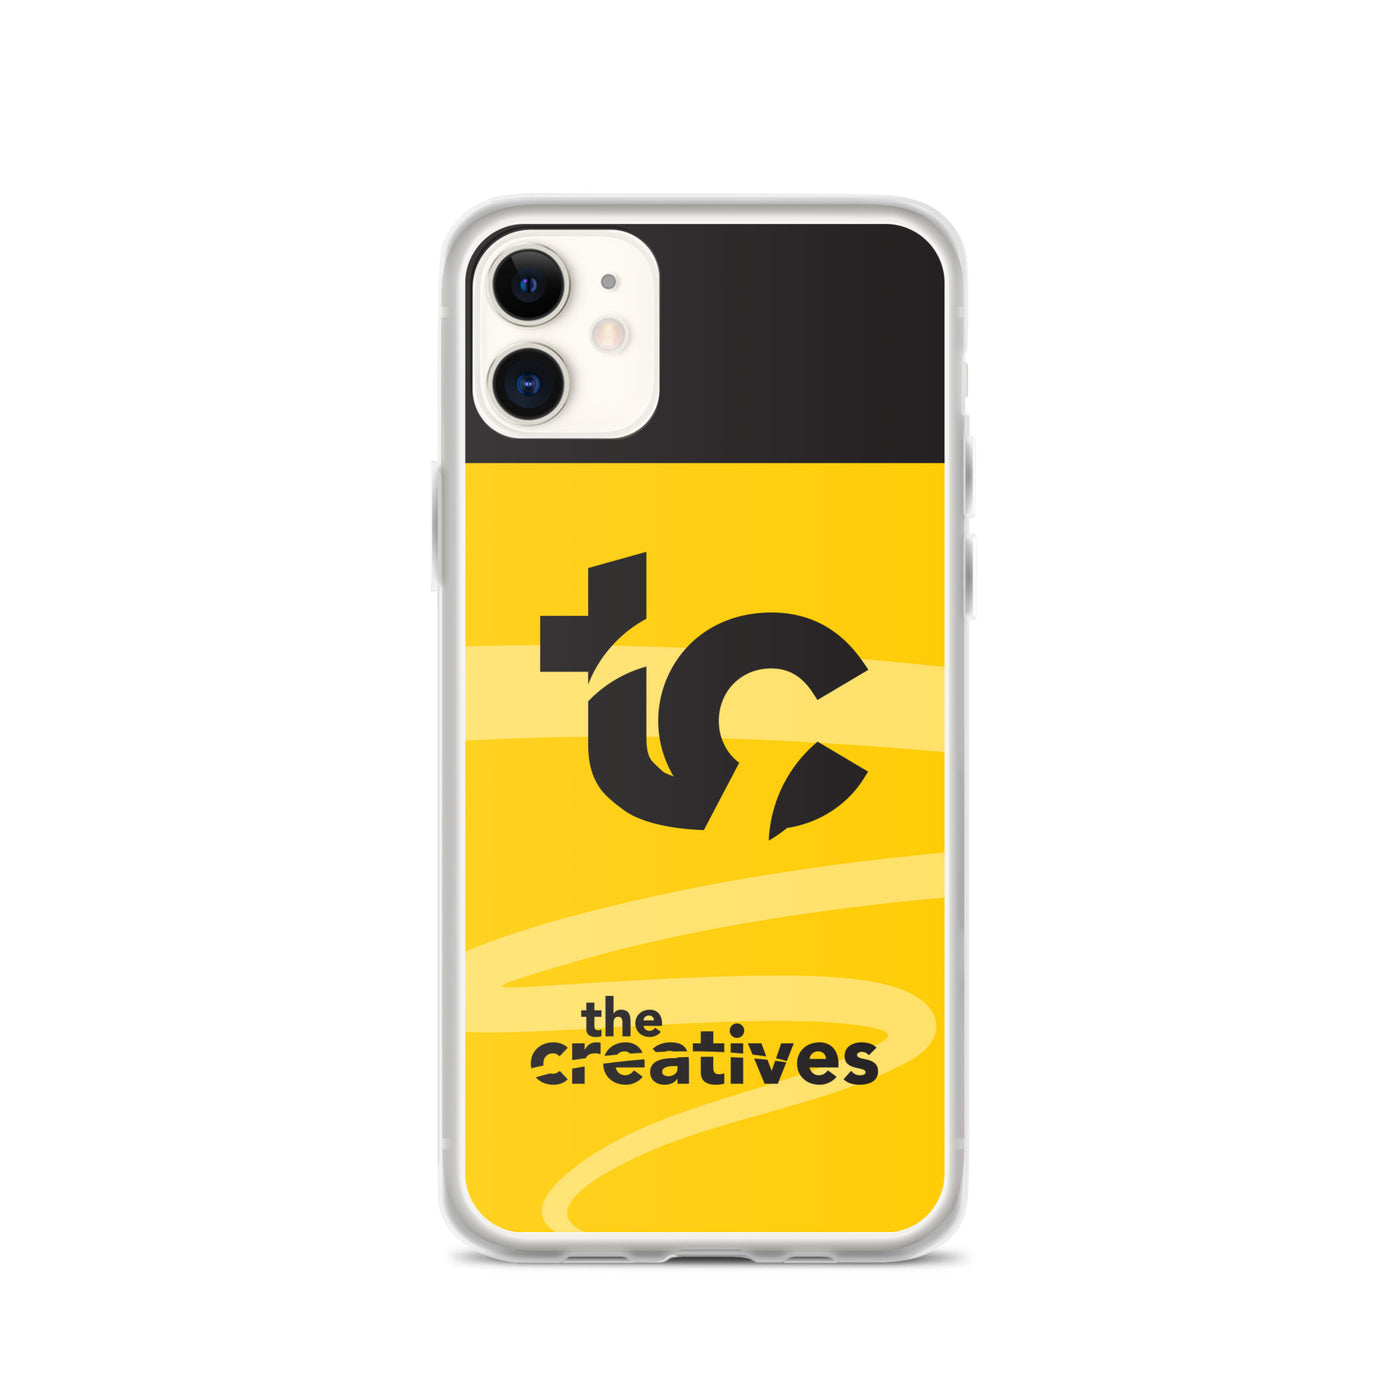 The Creatives Flagship iPhone Case